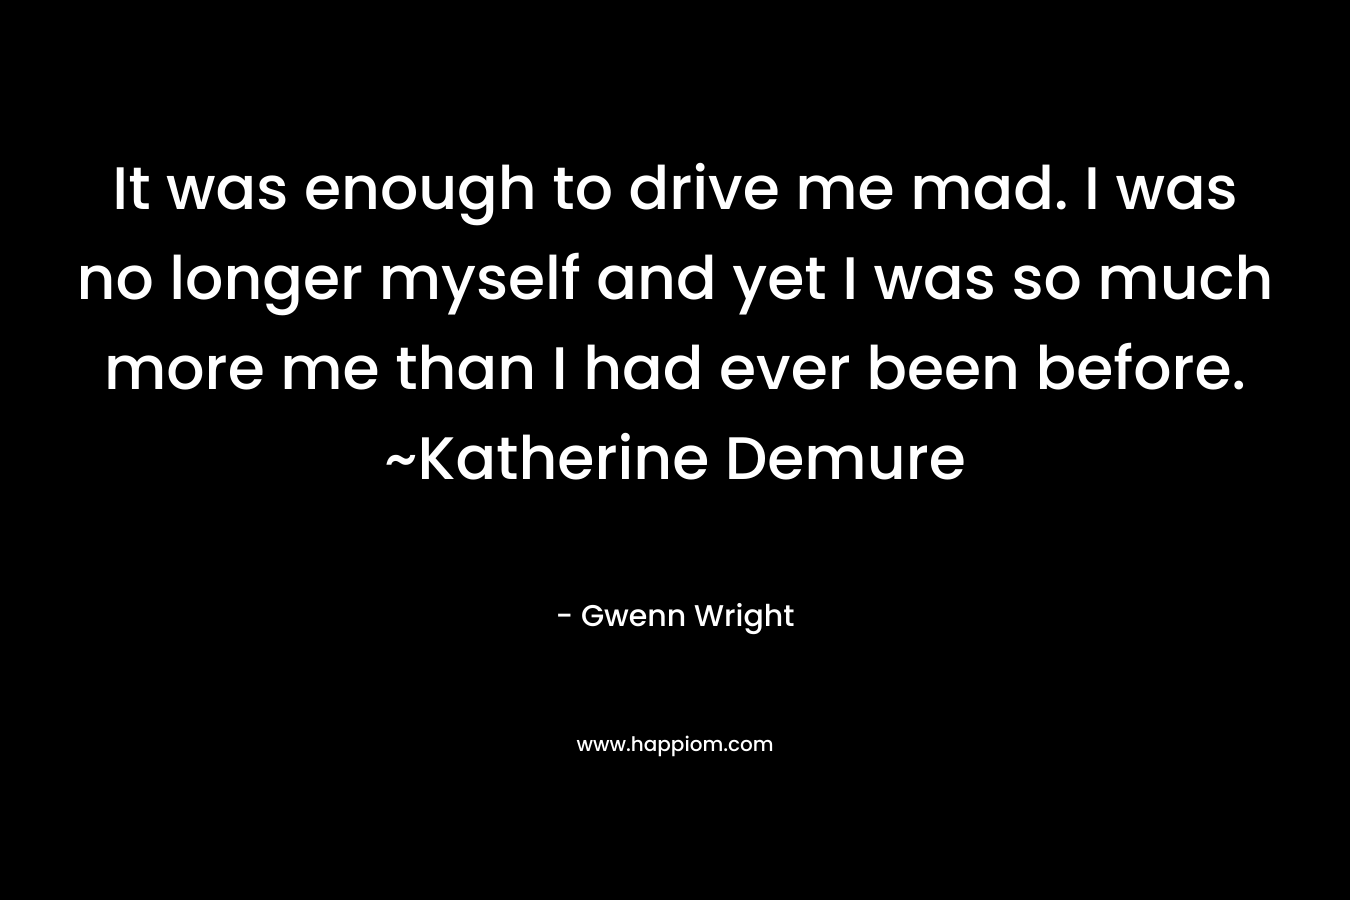 It was enough to drive me mad. I was no longer myself and yet I was so much more me than I had ever been before. ~Katherine Demure